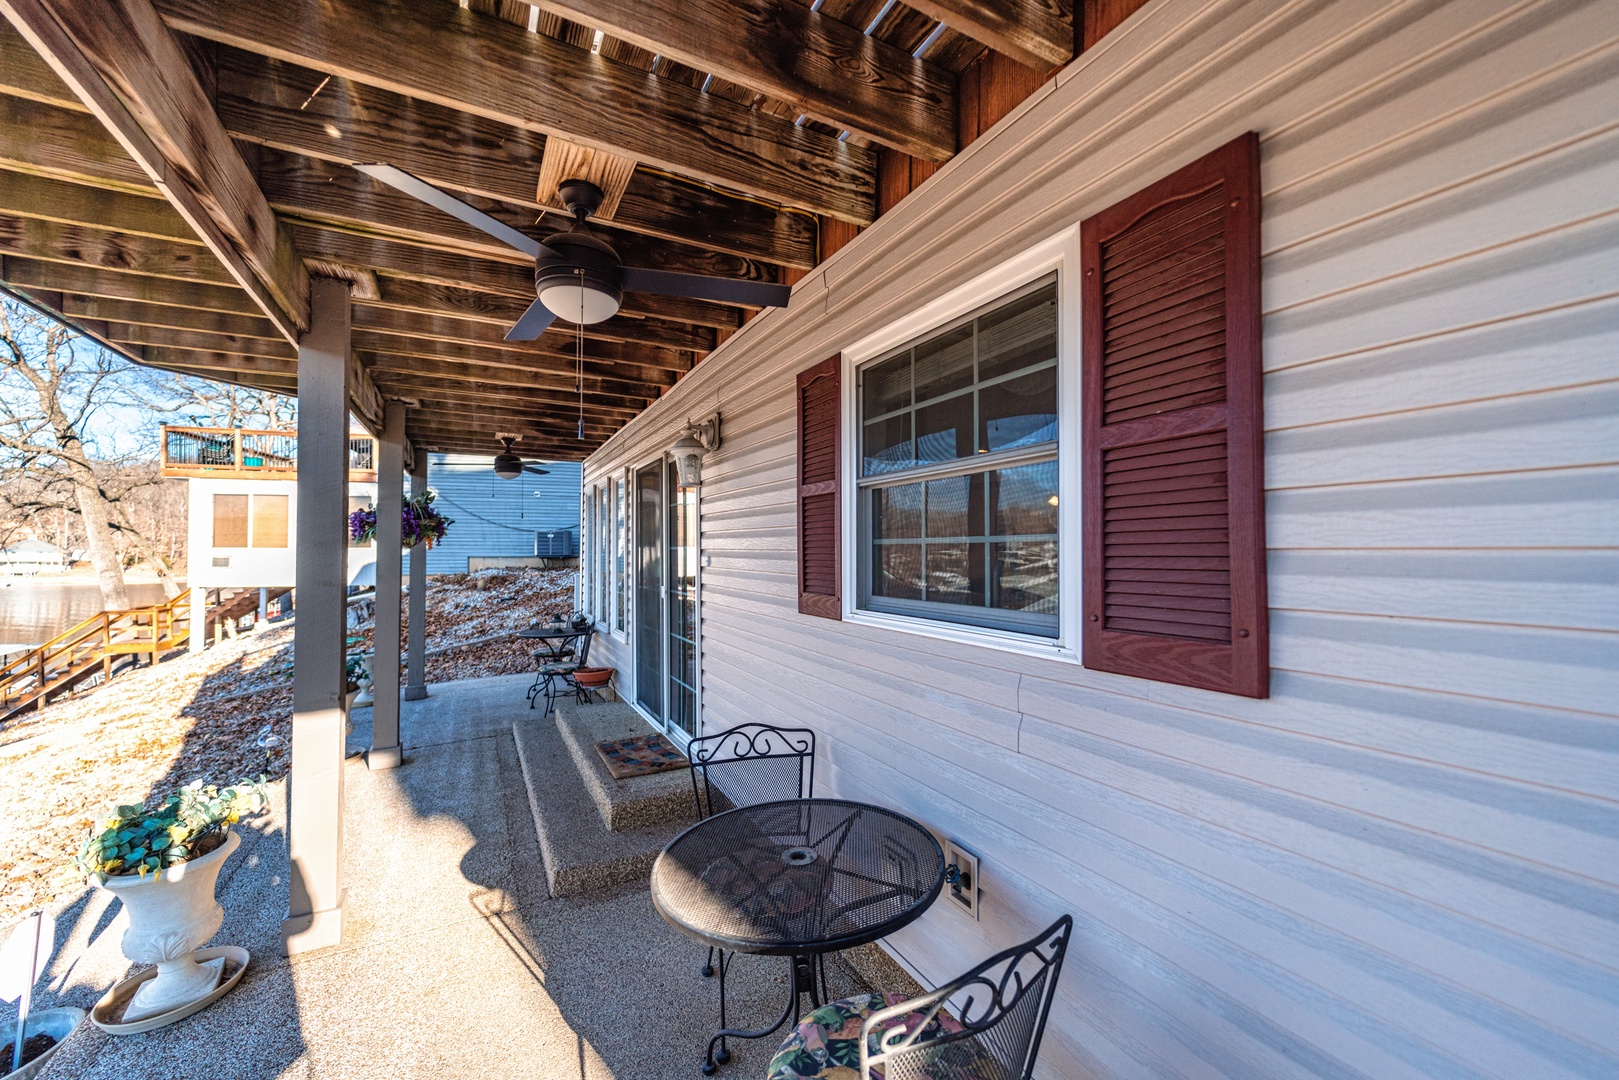 Dine alfresco or lounge the day away on the lower-level patio